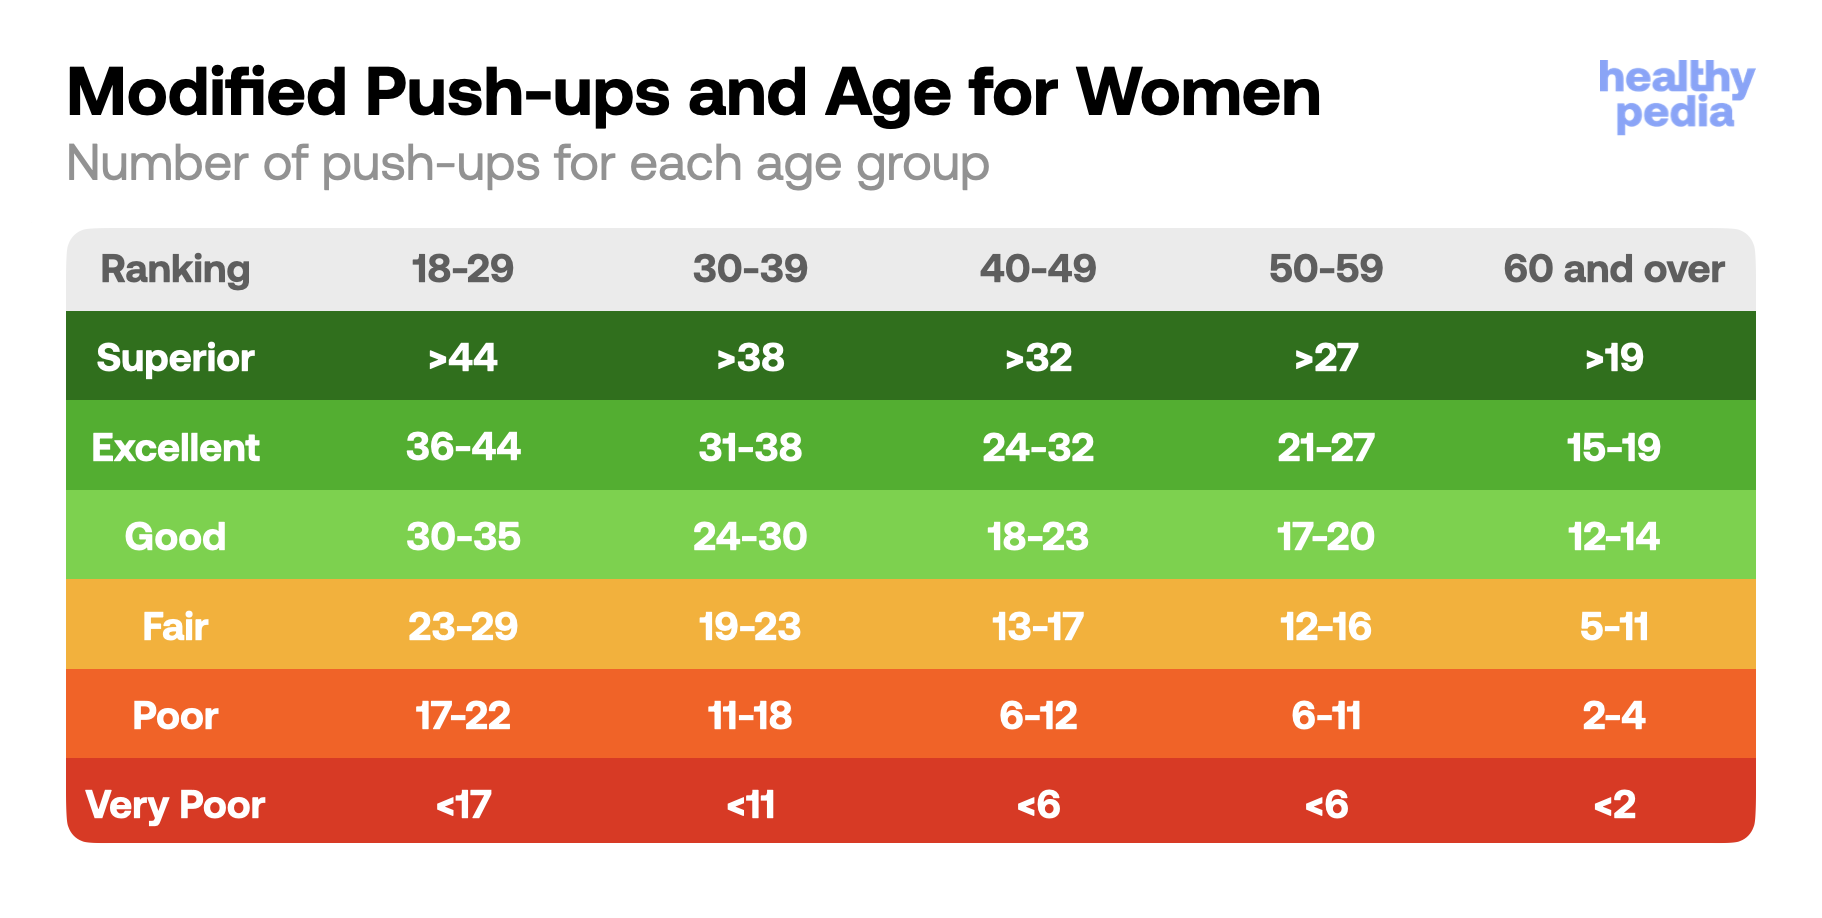 Modified Push-ups and Age for Women, stats